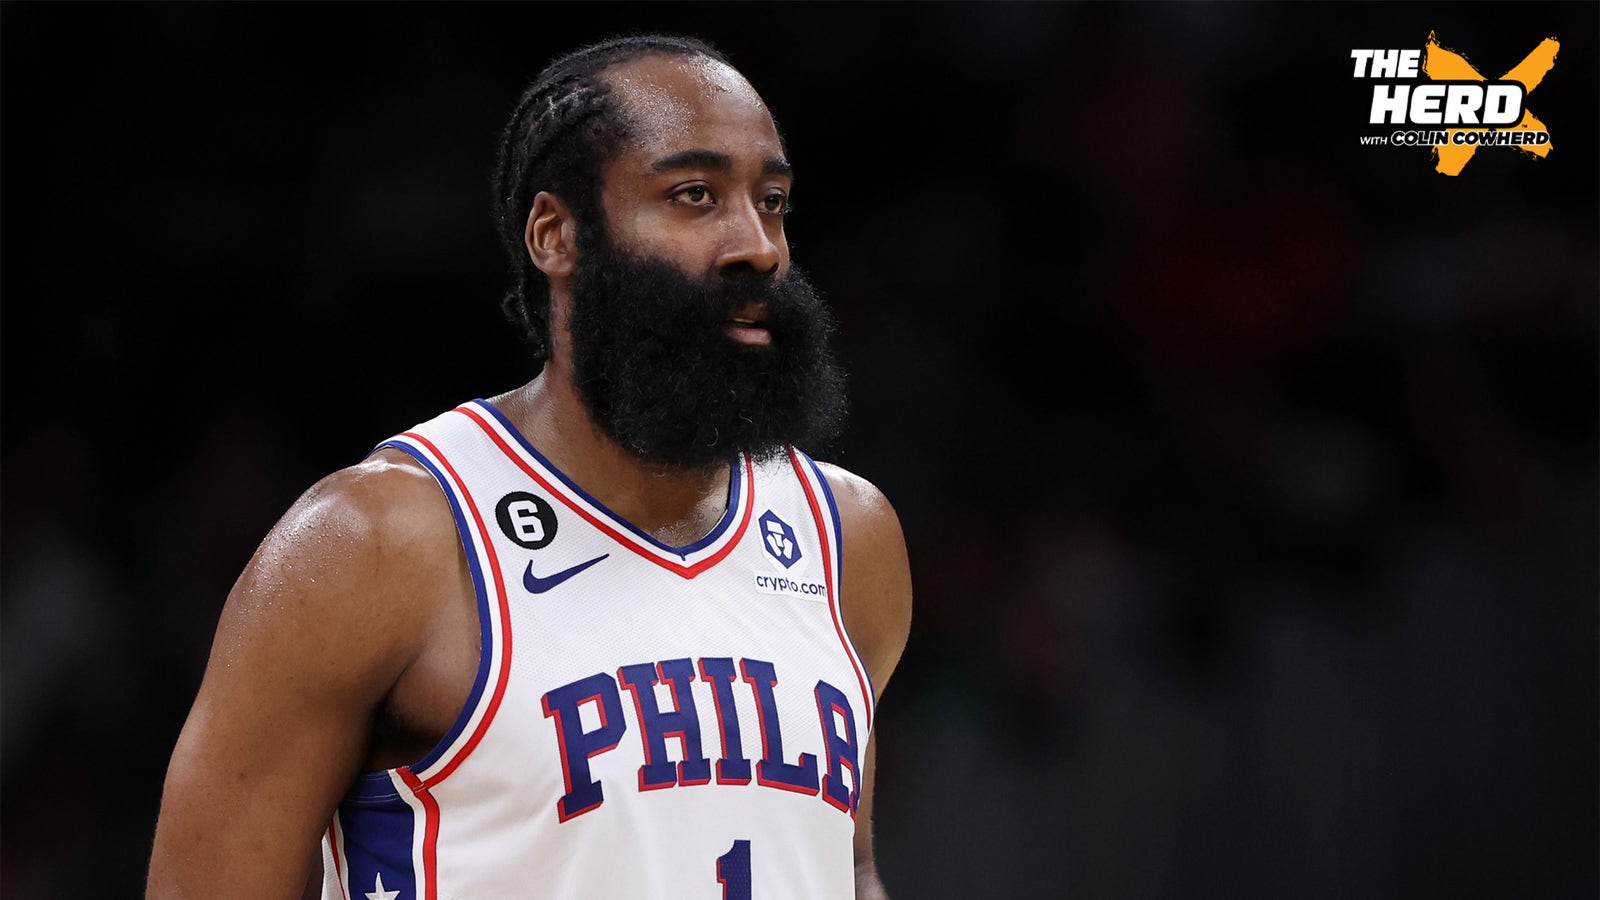 Colin Cowherd reacts to the blockbuster James Harden trade